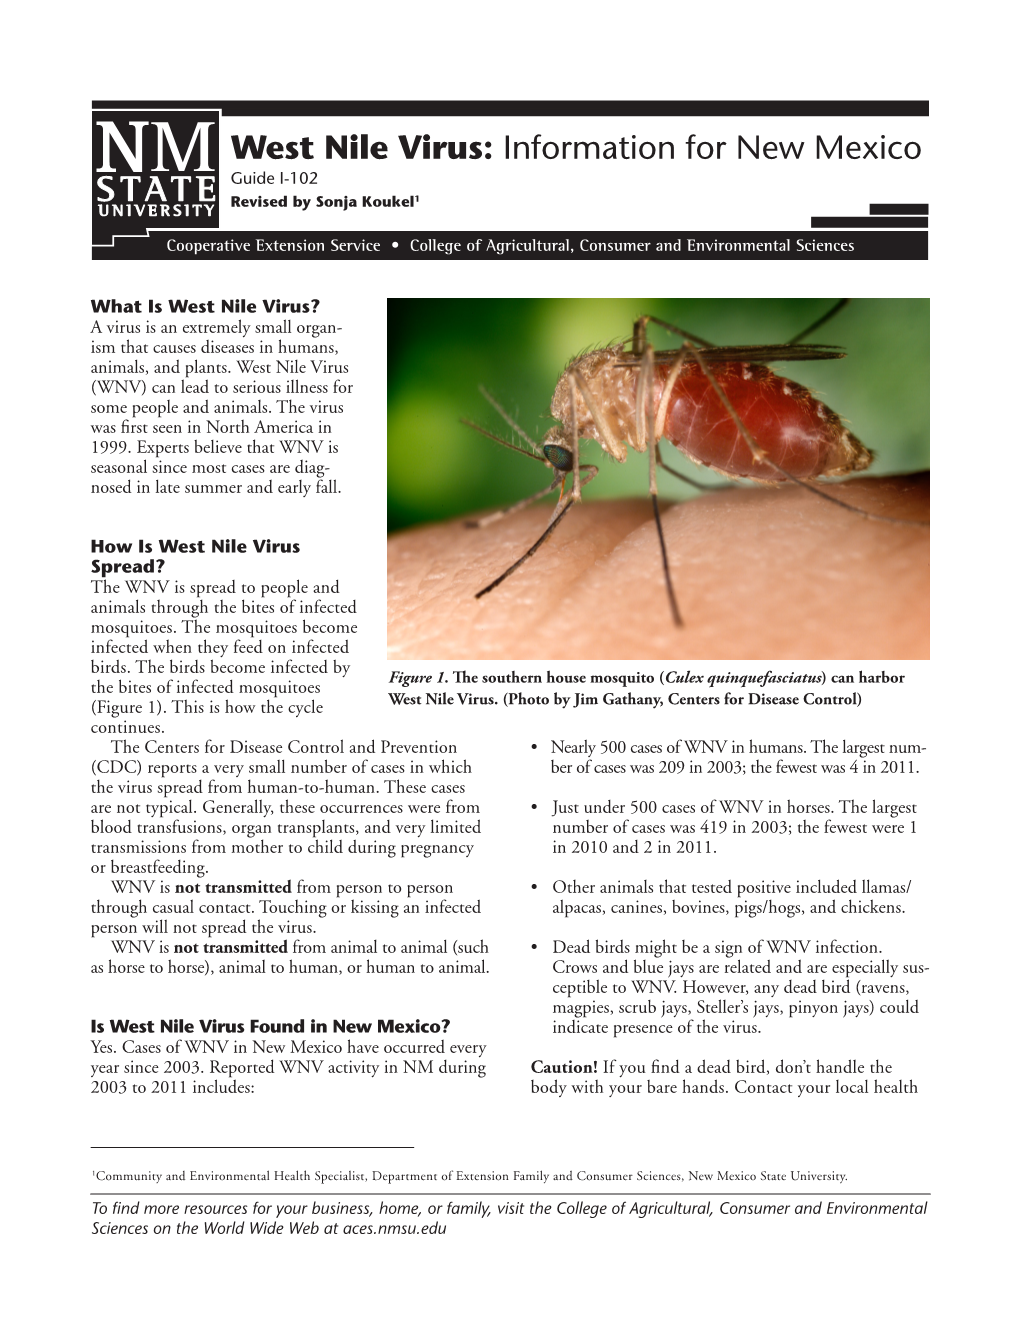 West Nile Virus: Information for New Mexico Guide I-102 Revised by Sonja Koukel1